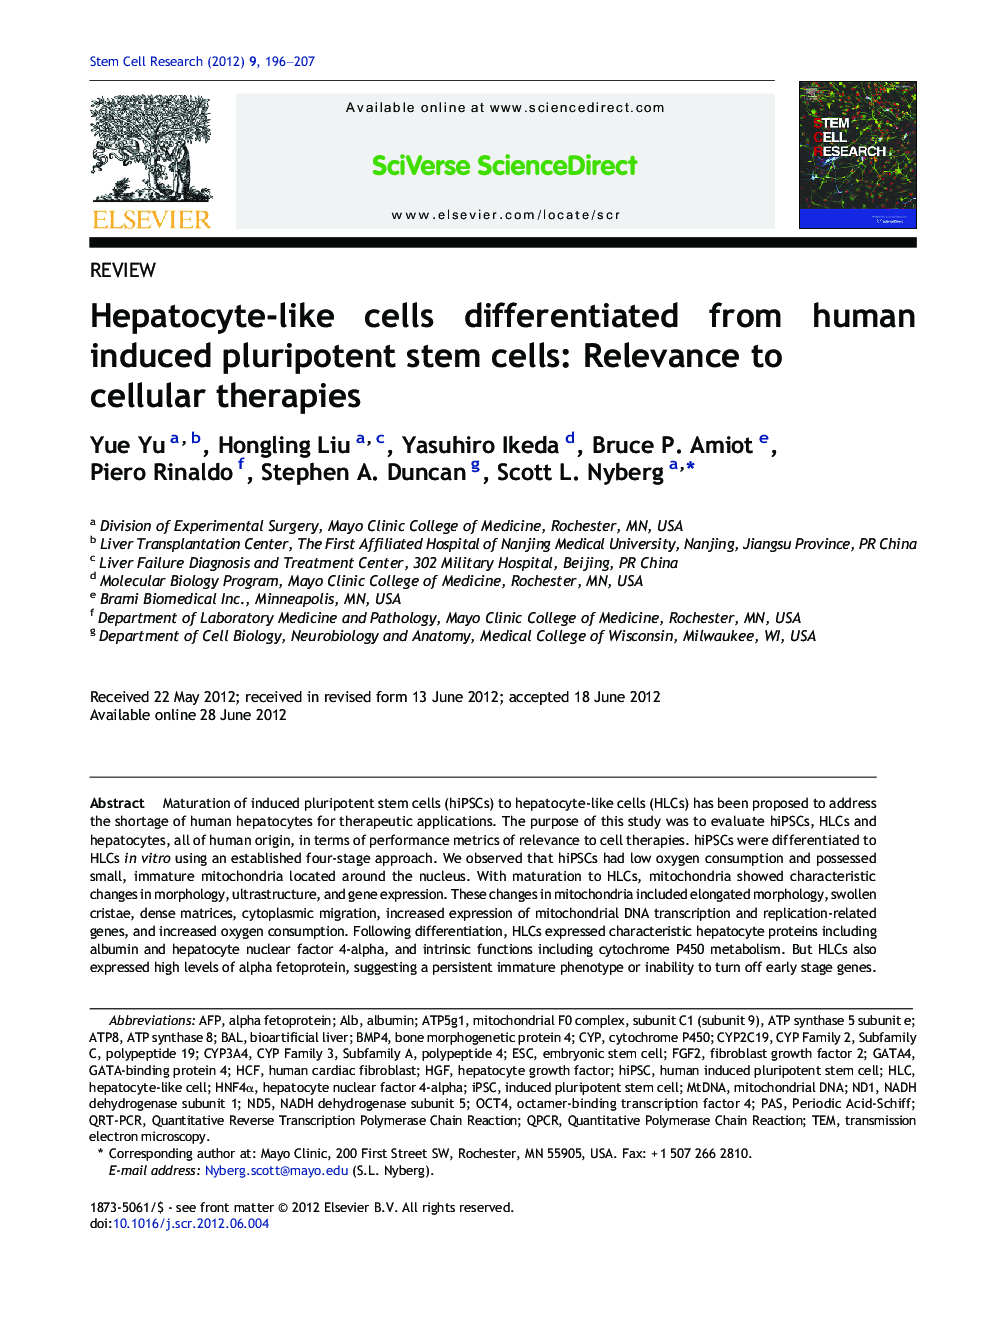 Hepatocyte-like cells differentiated from human induced pluripotent stem cells: Relevance to cellular therapies